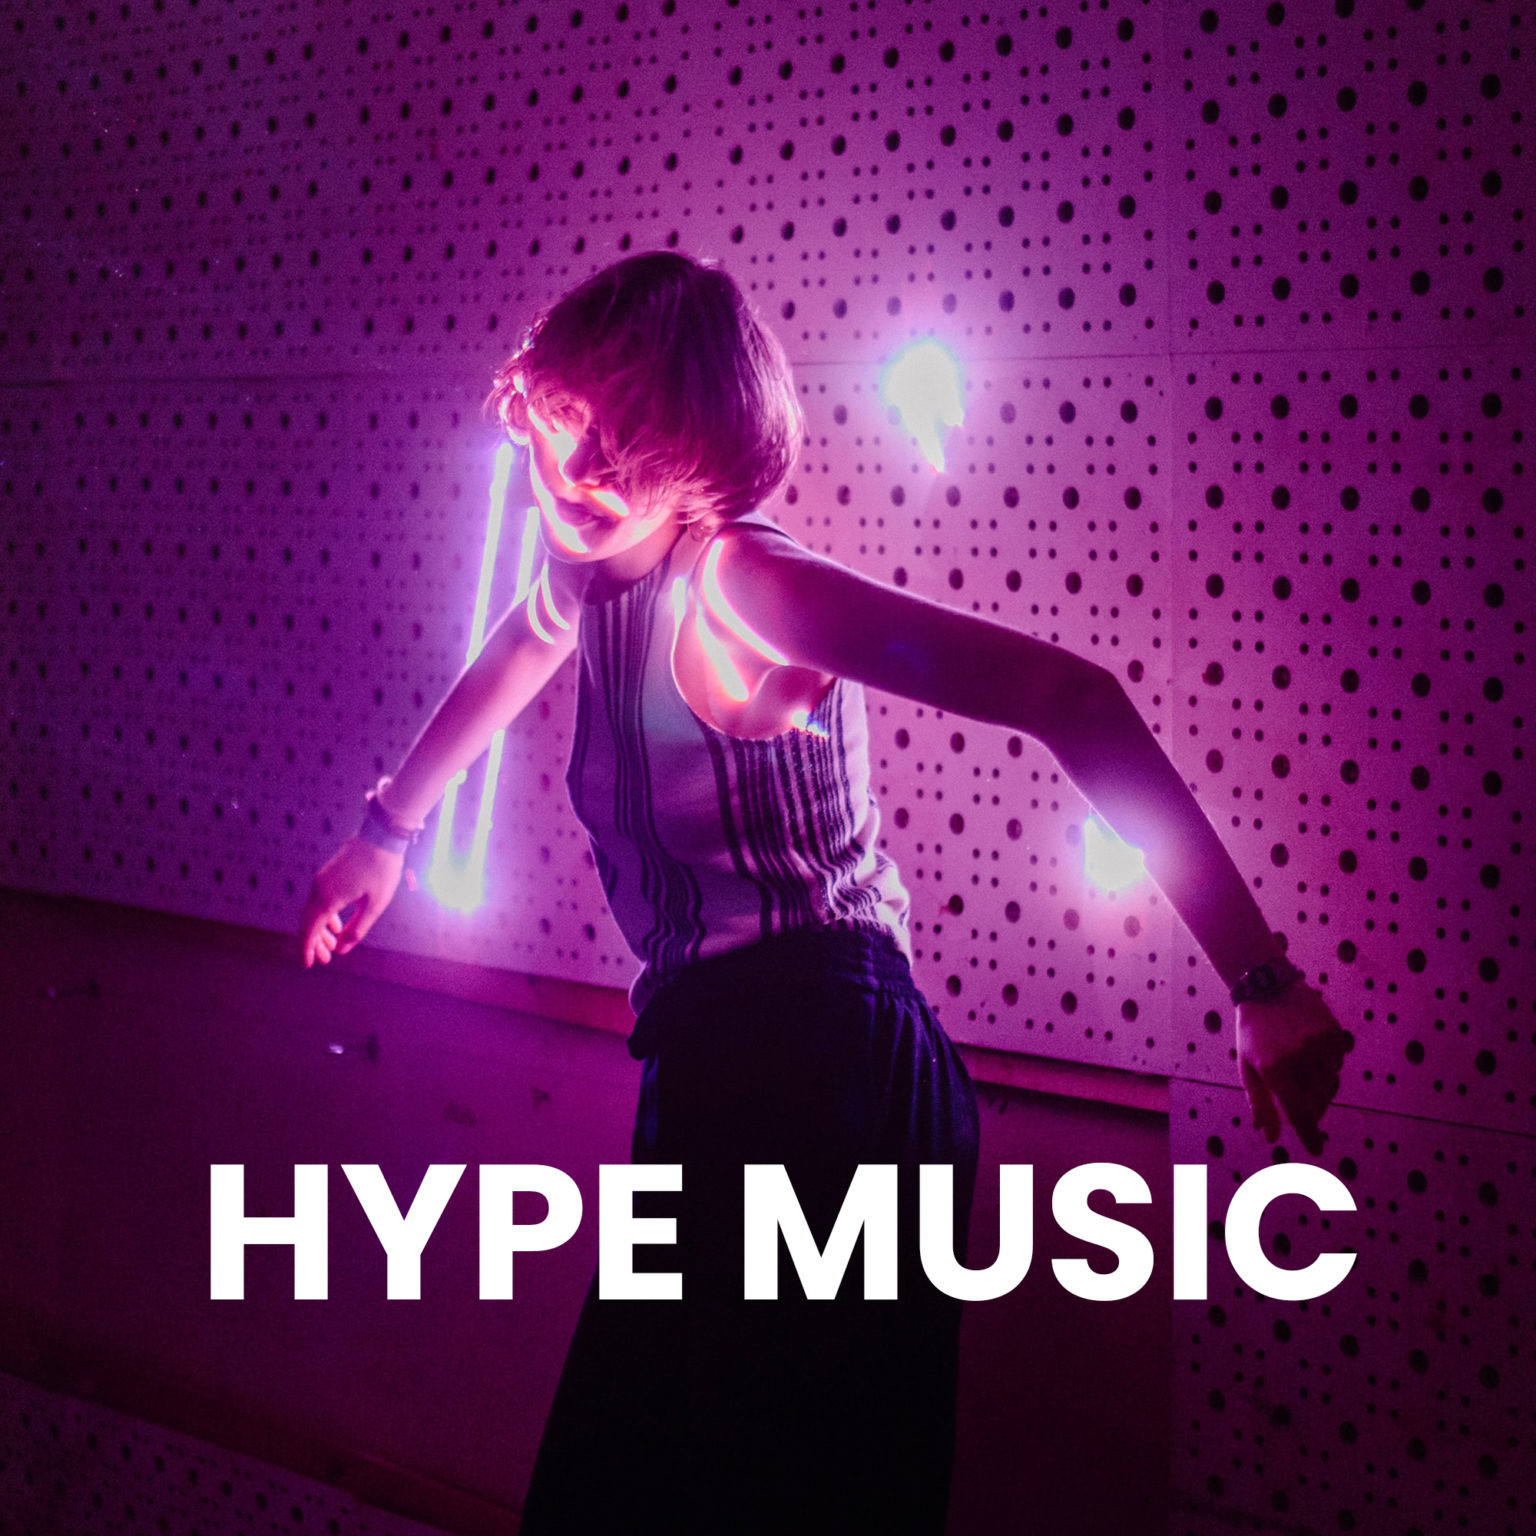 The Hype Music of 2022 Best Songs To Get Hyped To